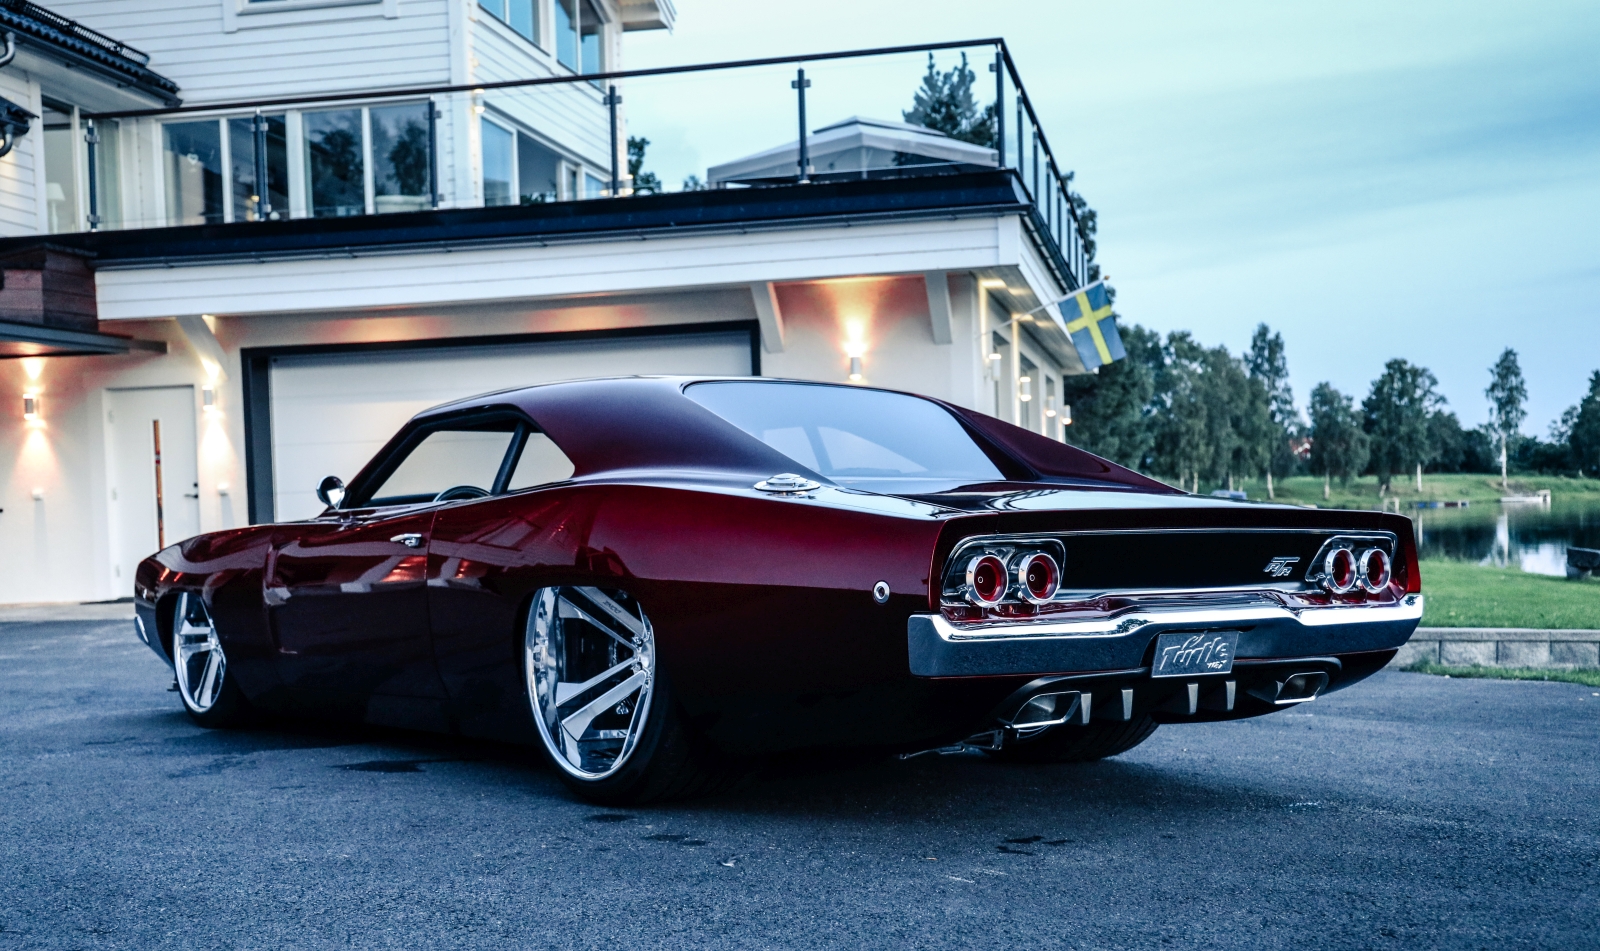 Dodge Charger Powered by Johan